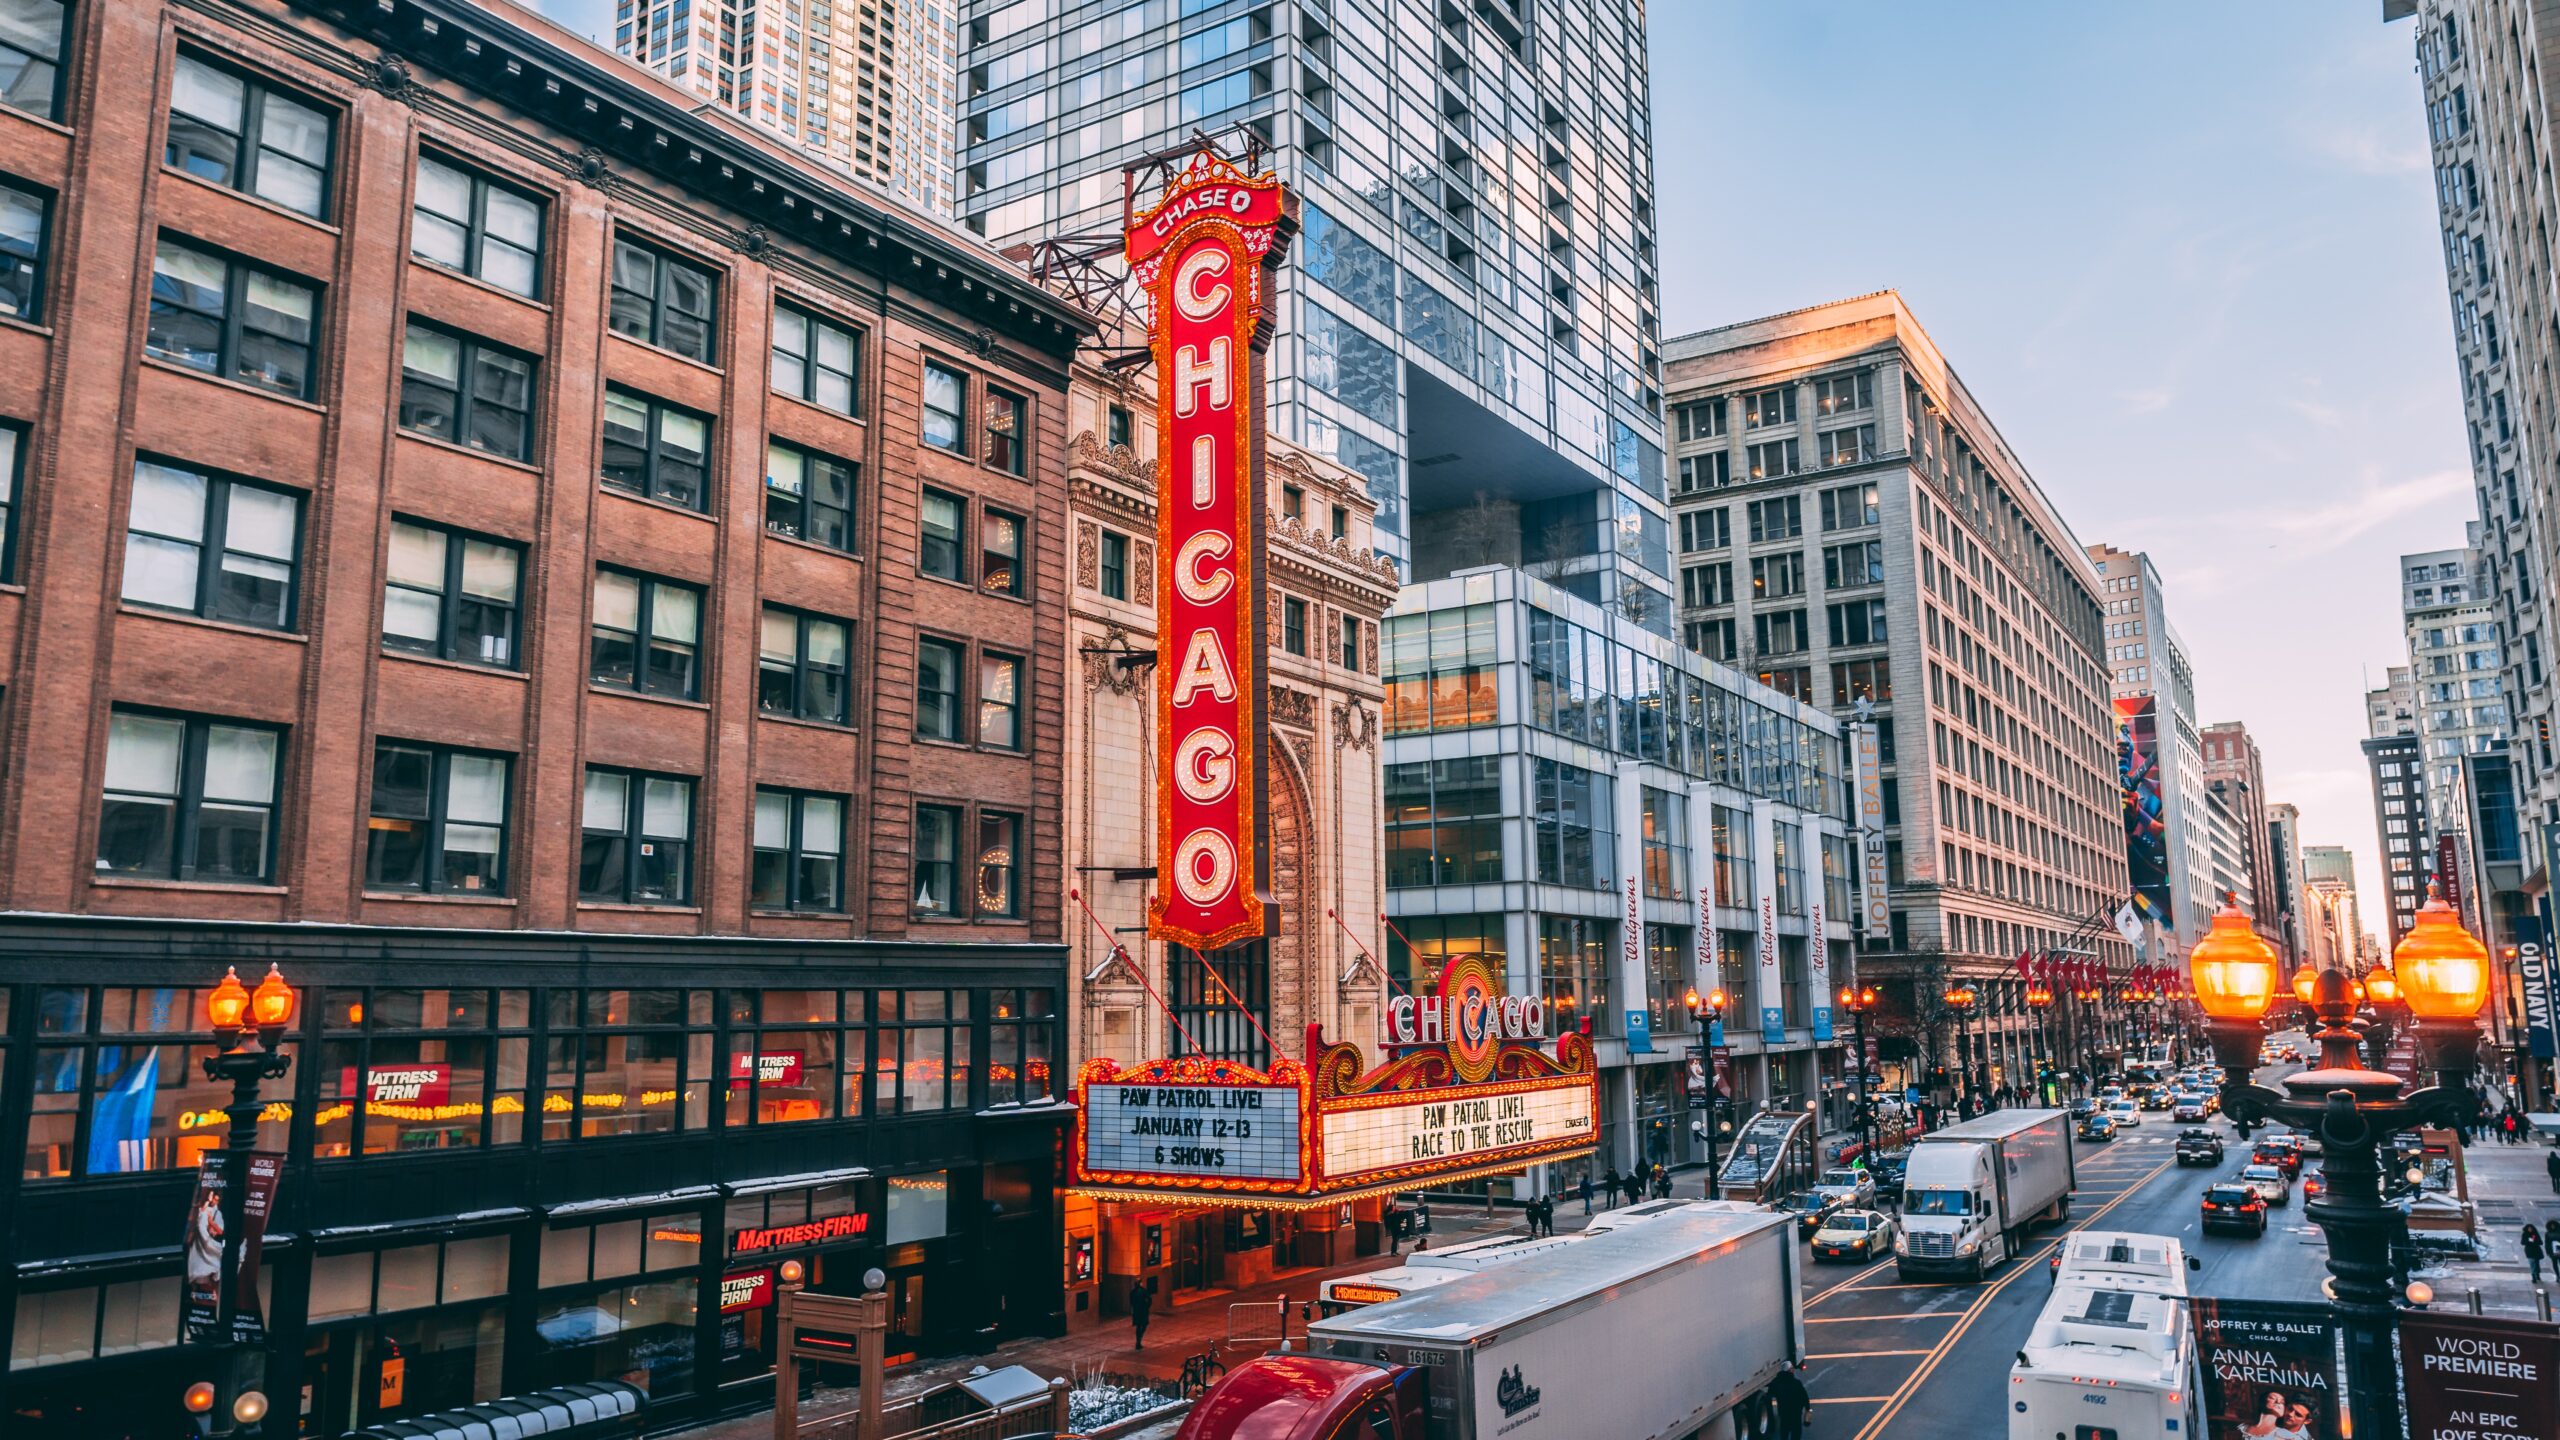 Chicago, like other metro areas, has higher cost-of-living and salaries than the US average, but it's one of the more affordable major cities.